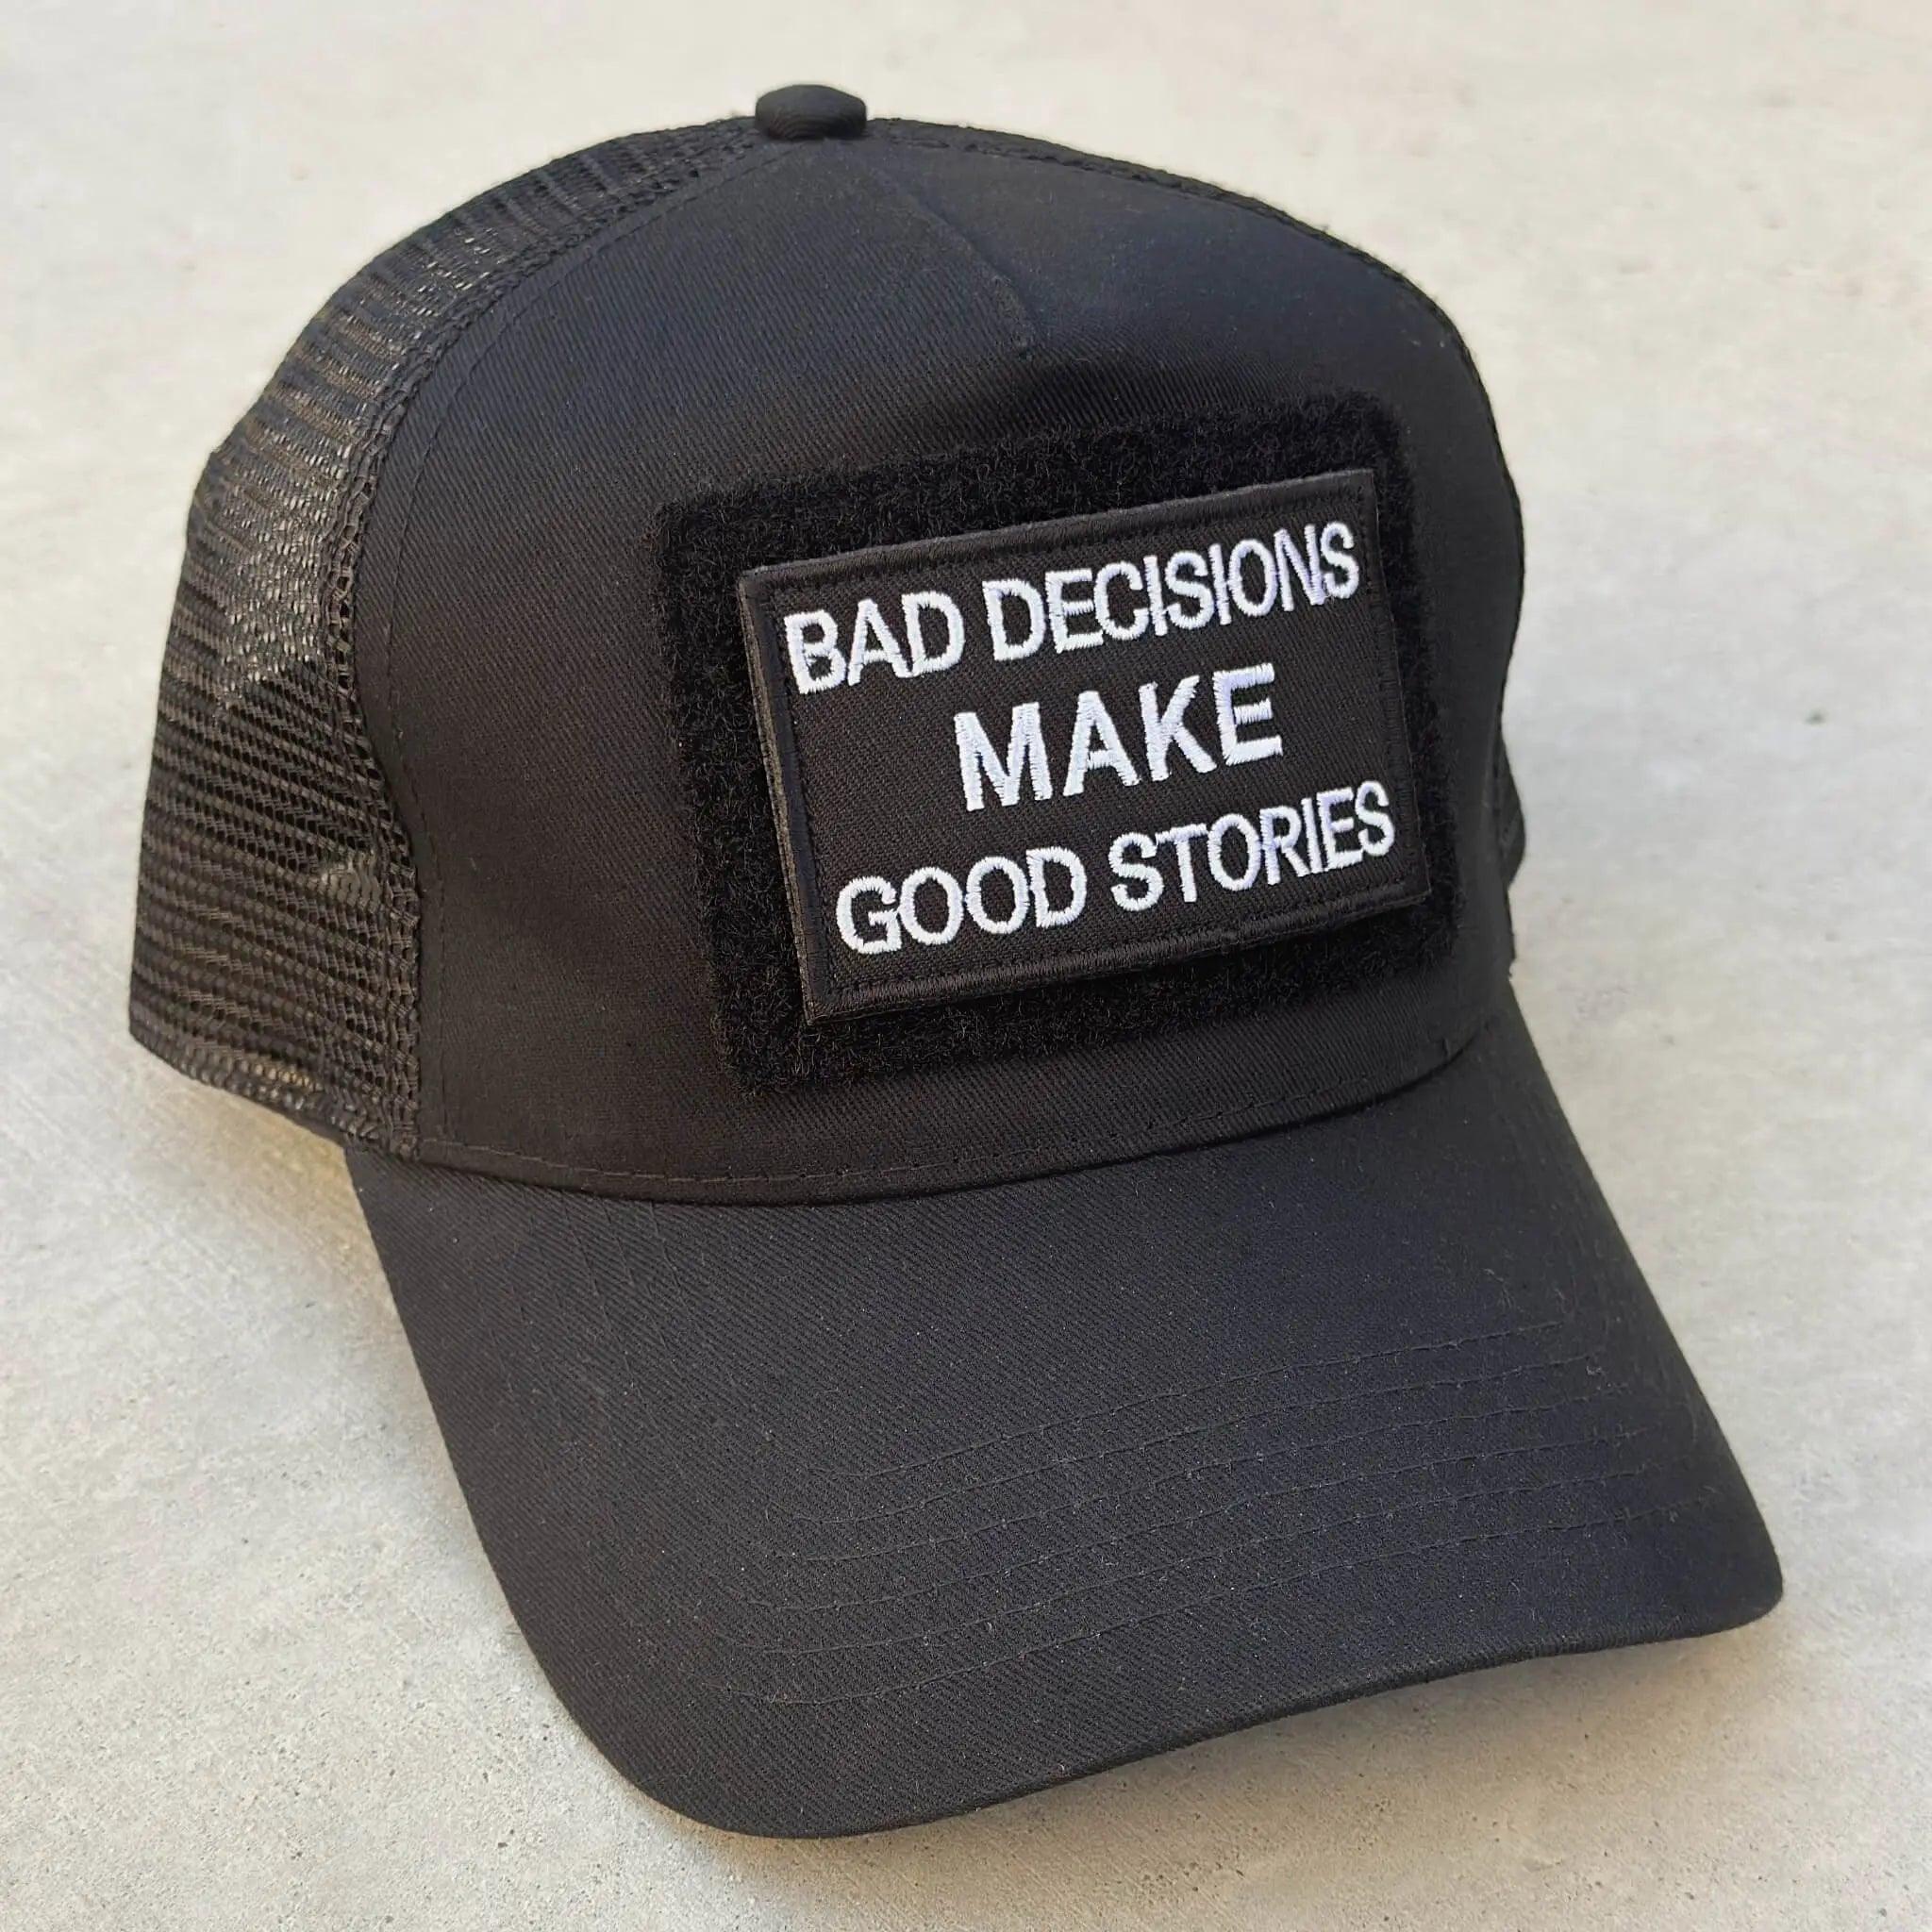 Trucker snapback cap in black with Bad Decision Makes Good Stories patch